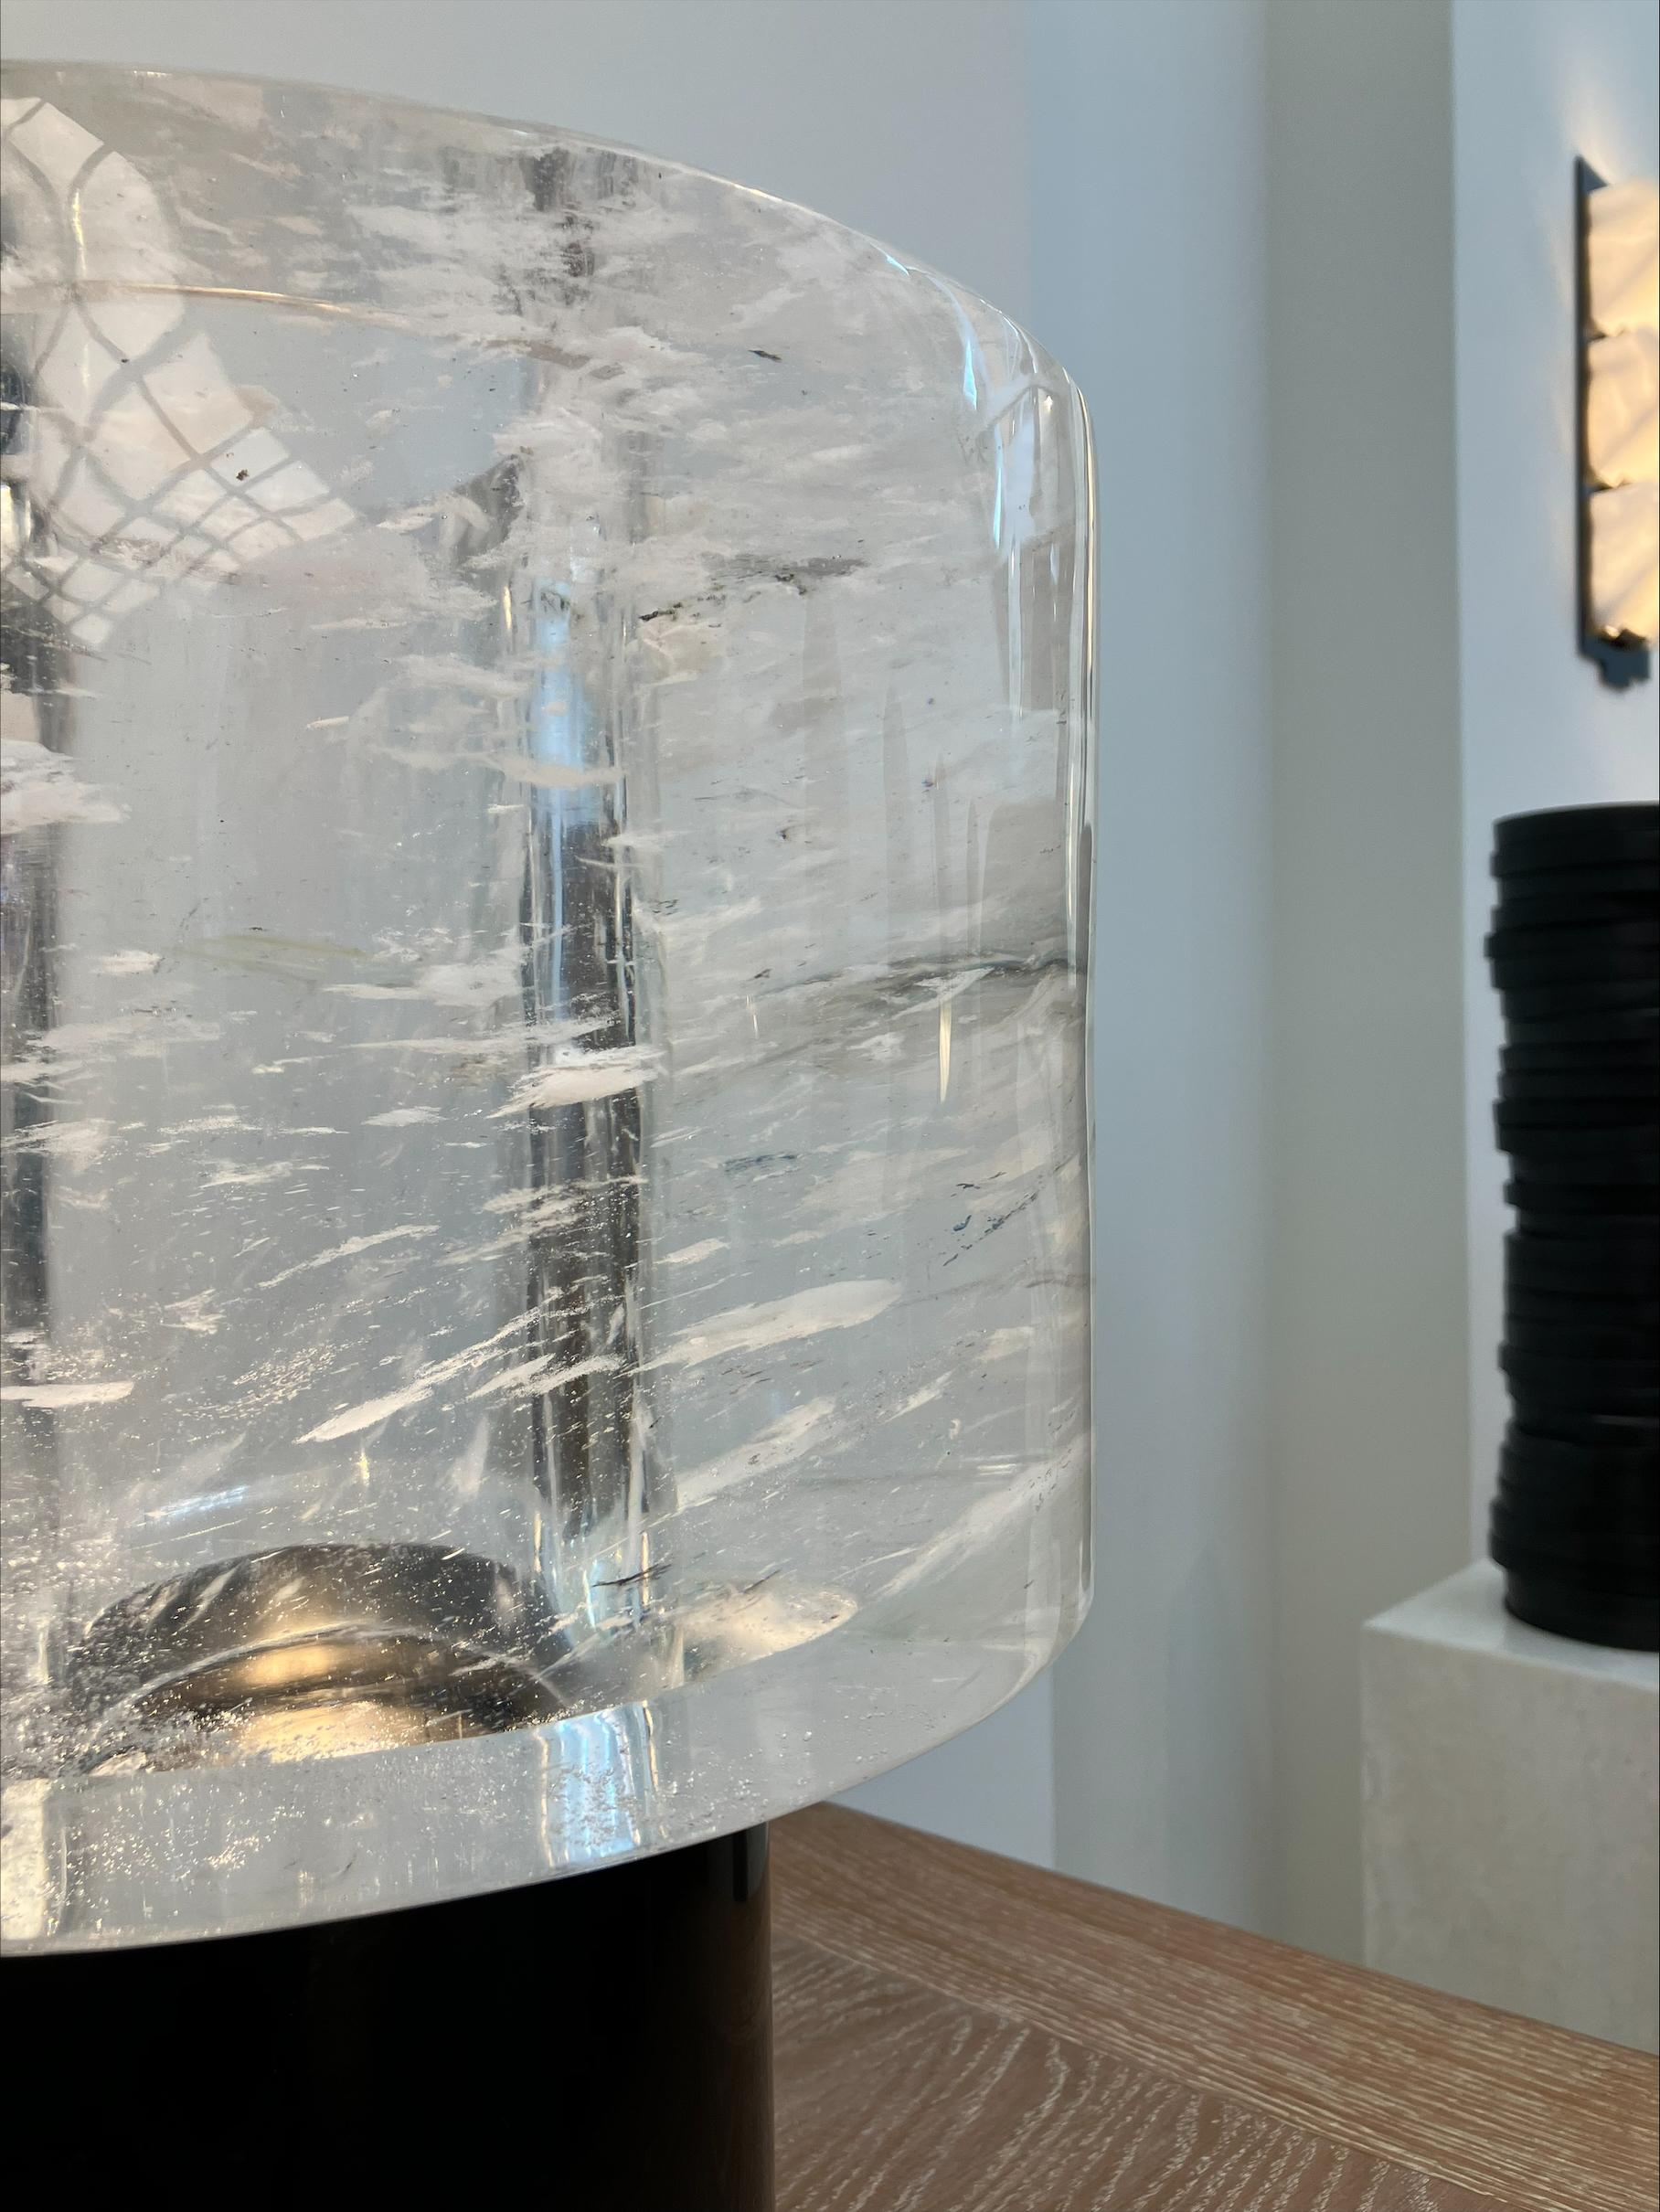 Beautiful, elegant and striking. This table lamp by Gilles Caffier is a beautiful design piece, that produces a soft light and fits in a number of different spaces.

